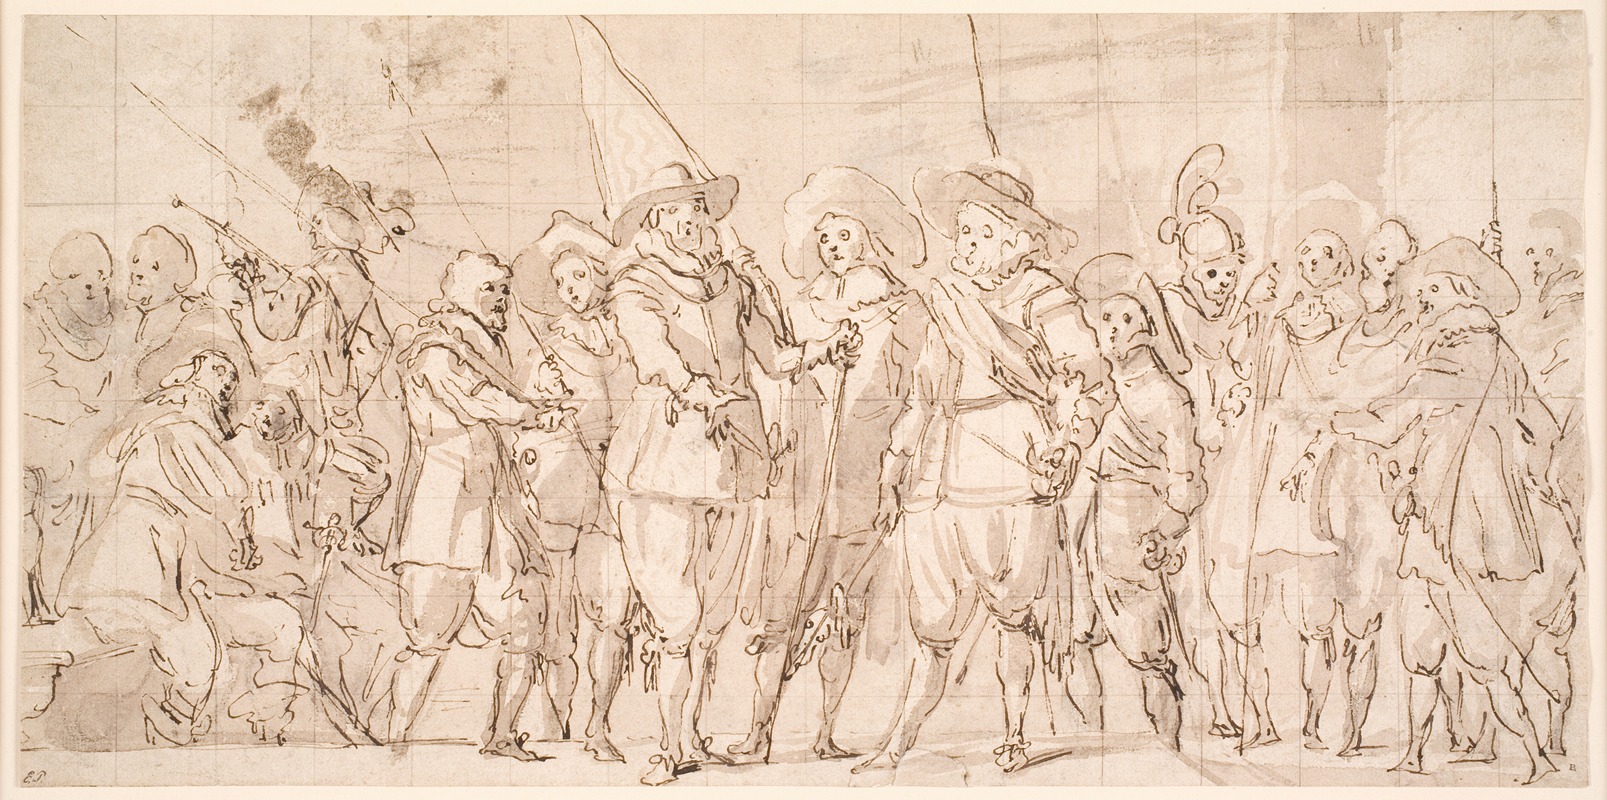 Thomas de Keyser - Officers and other civic guardsmen of the IIIrd District of Amsterdam, under the command of Captain Allaert Cloeck and Lieutenant Lucas Jacobsz Rotgans